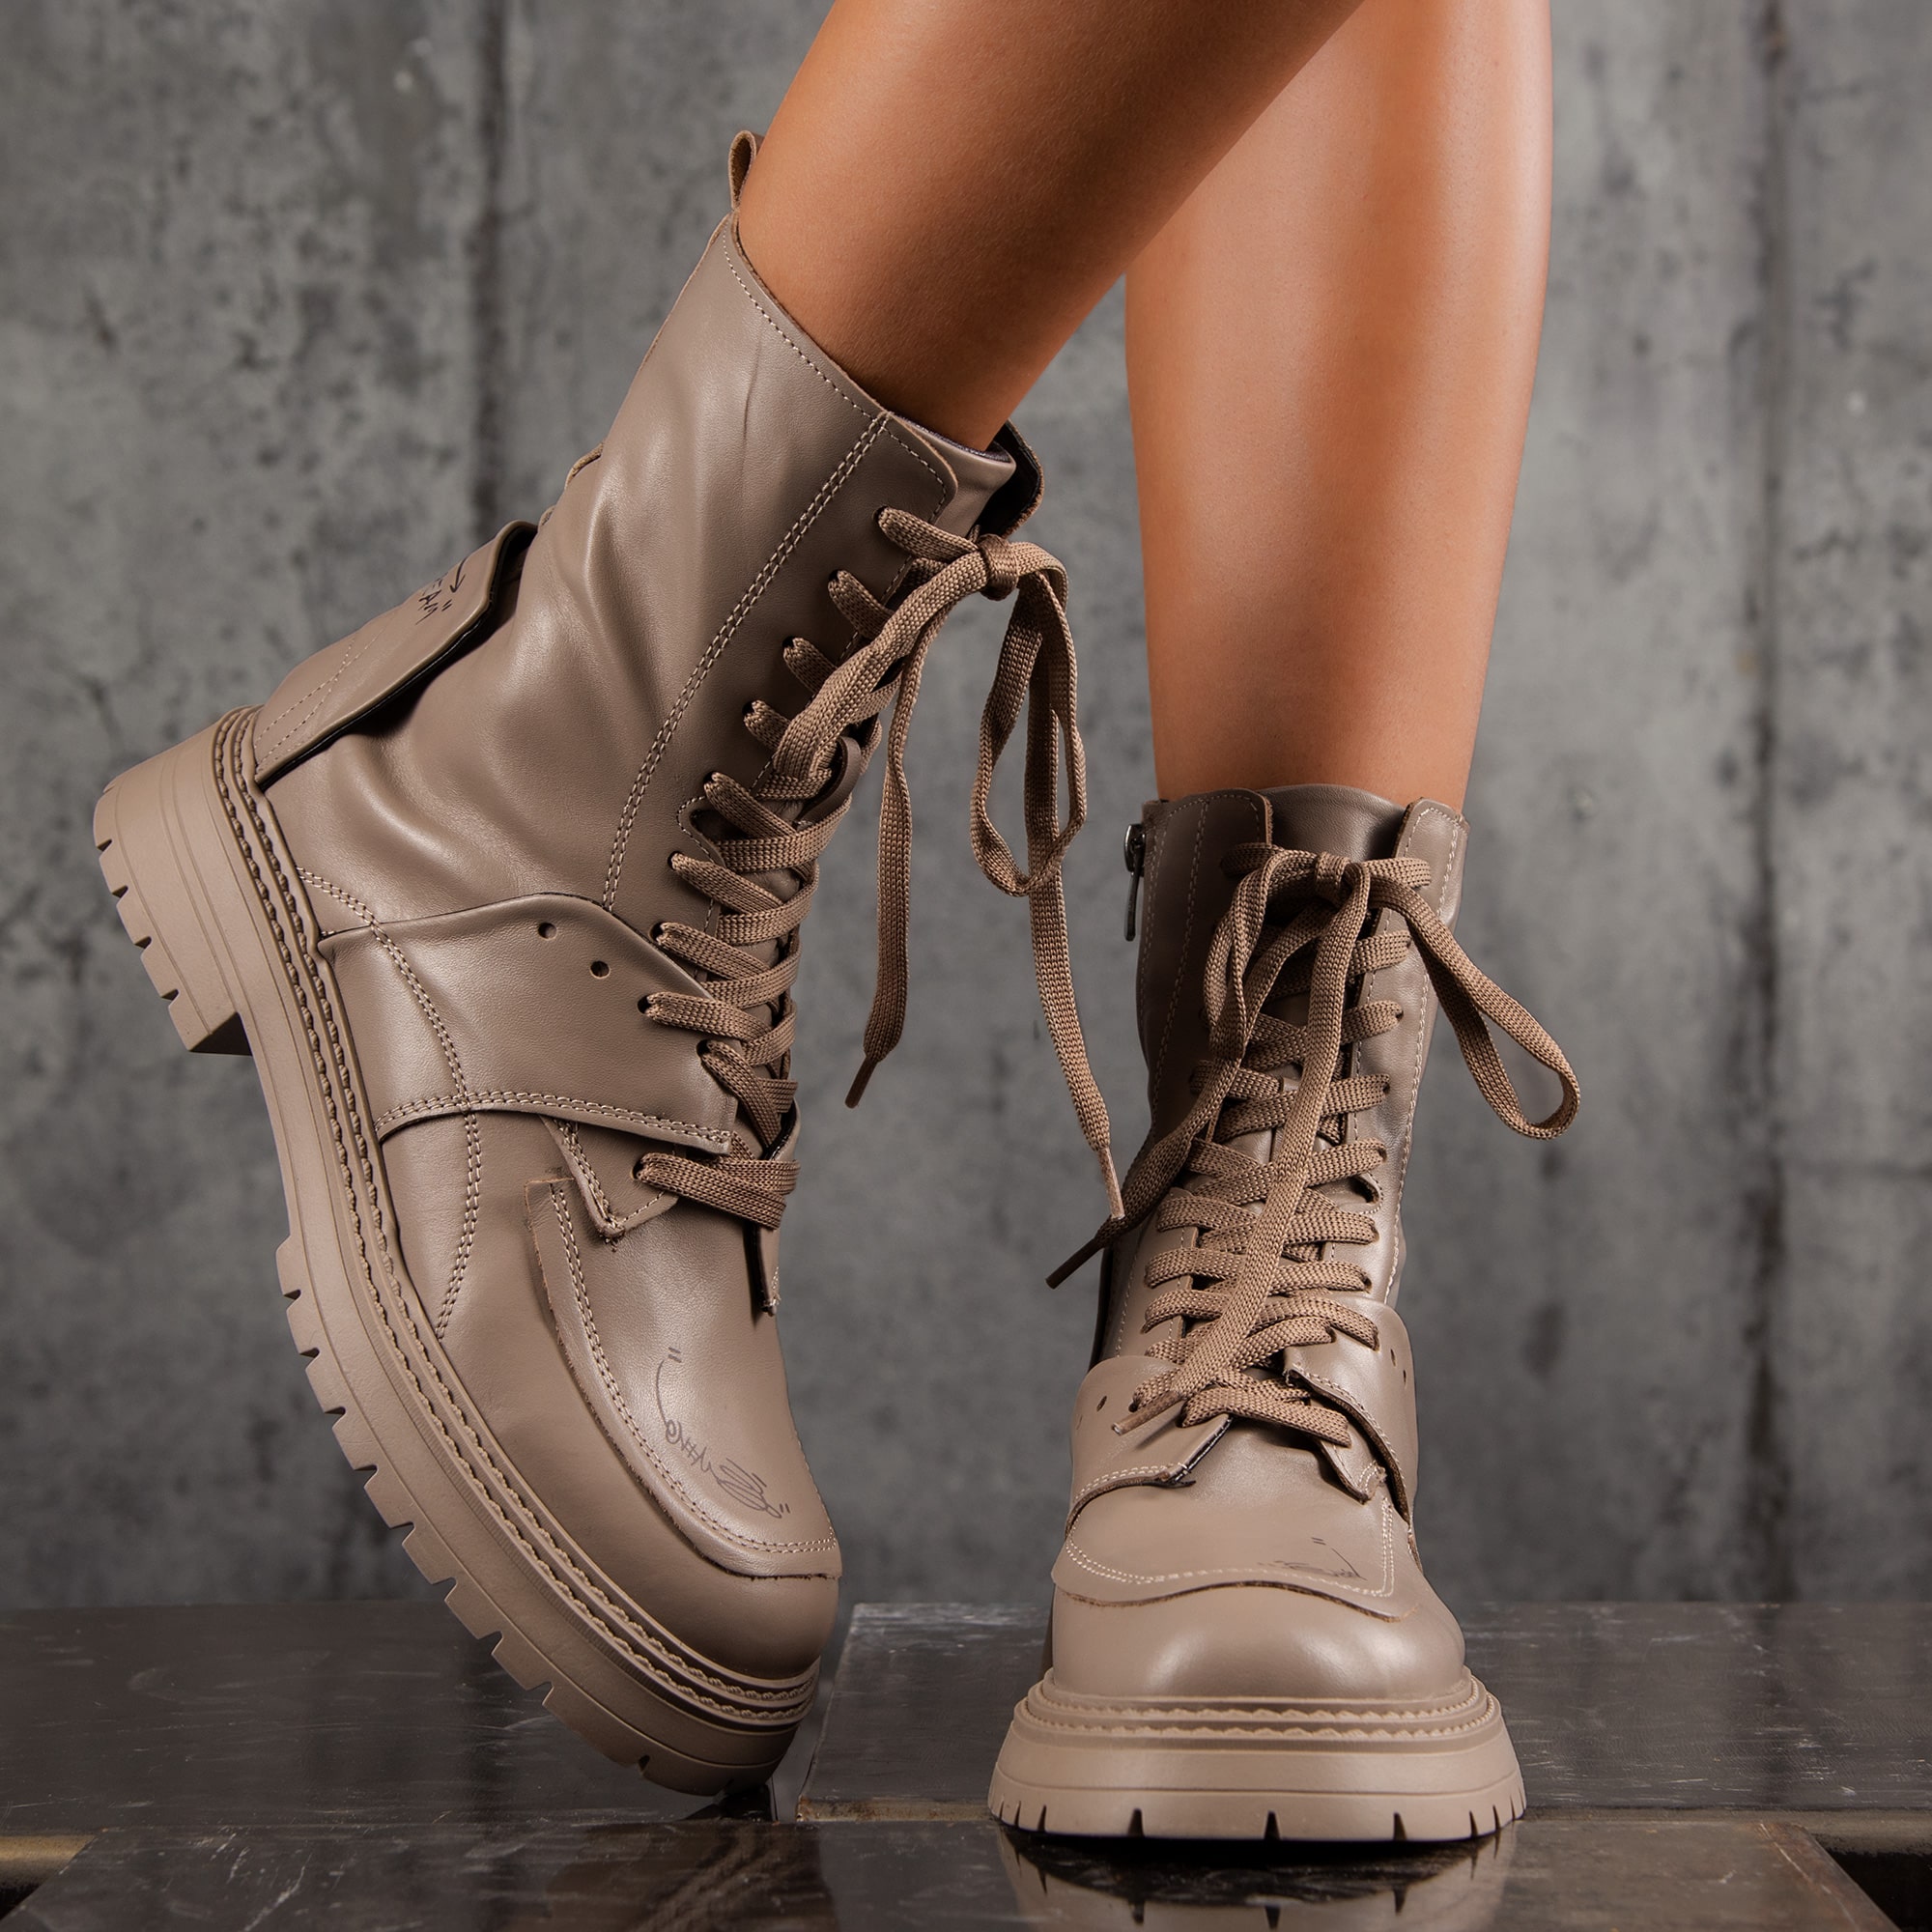 Society Graphic Boots, Beige Color